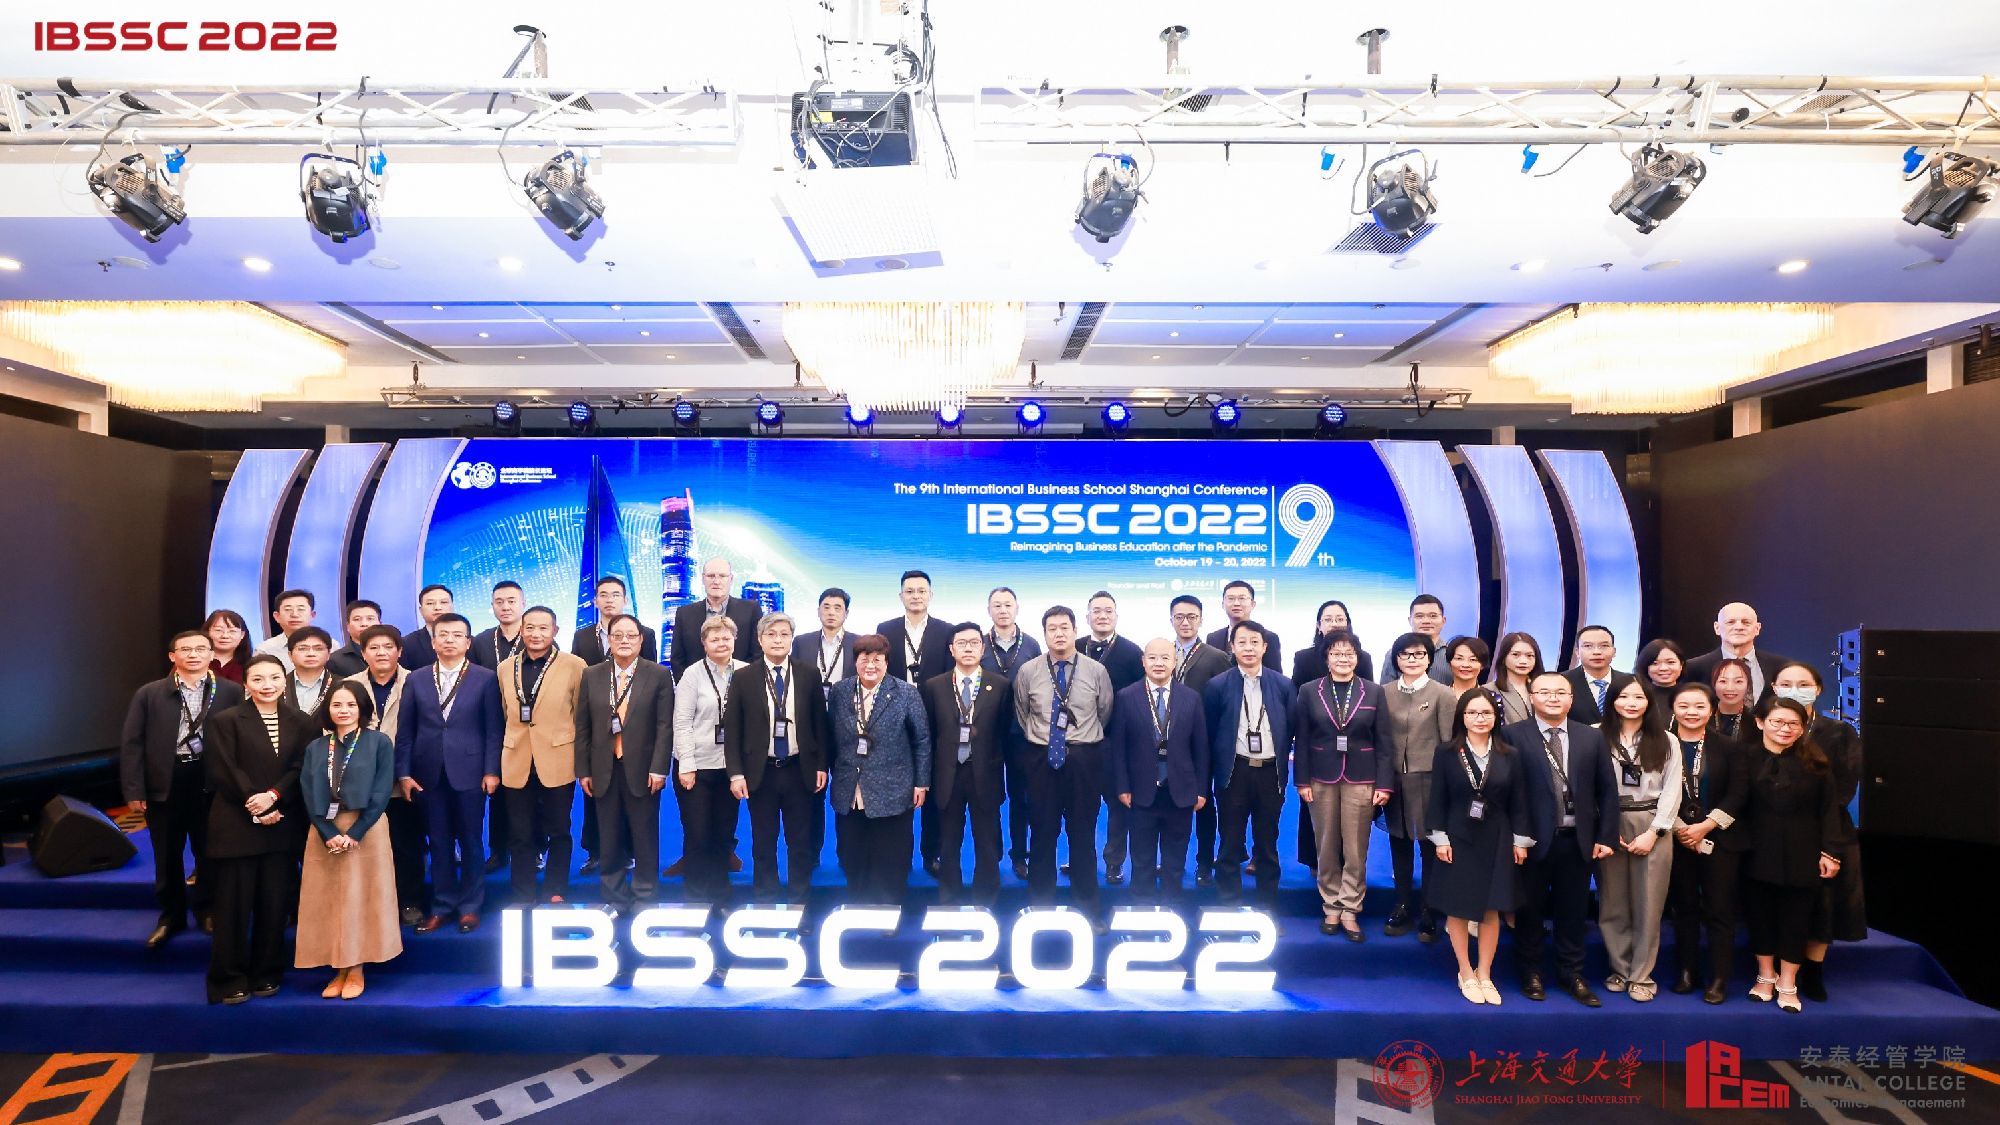 The 9th International Business School Shanghai Conference (IBSSC) Came to a Successful Conclusion